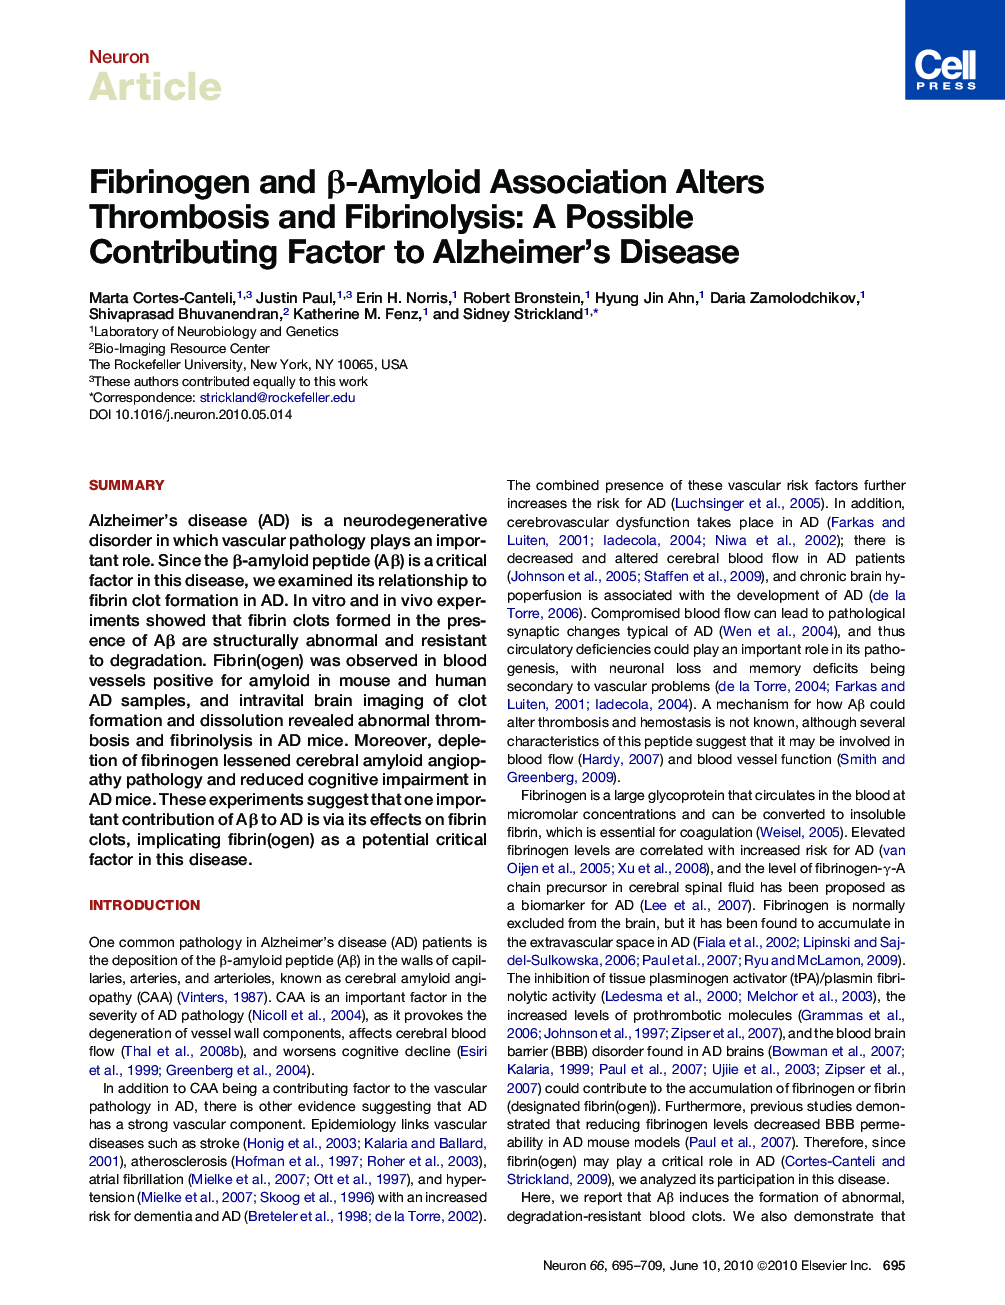 Fibrinogen and β-Amyloid Association Alters Thrombosis and Fibrinolysis: A Possible Contributing Factor to Alzheimer's Disease